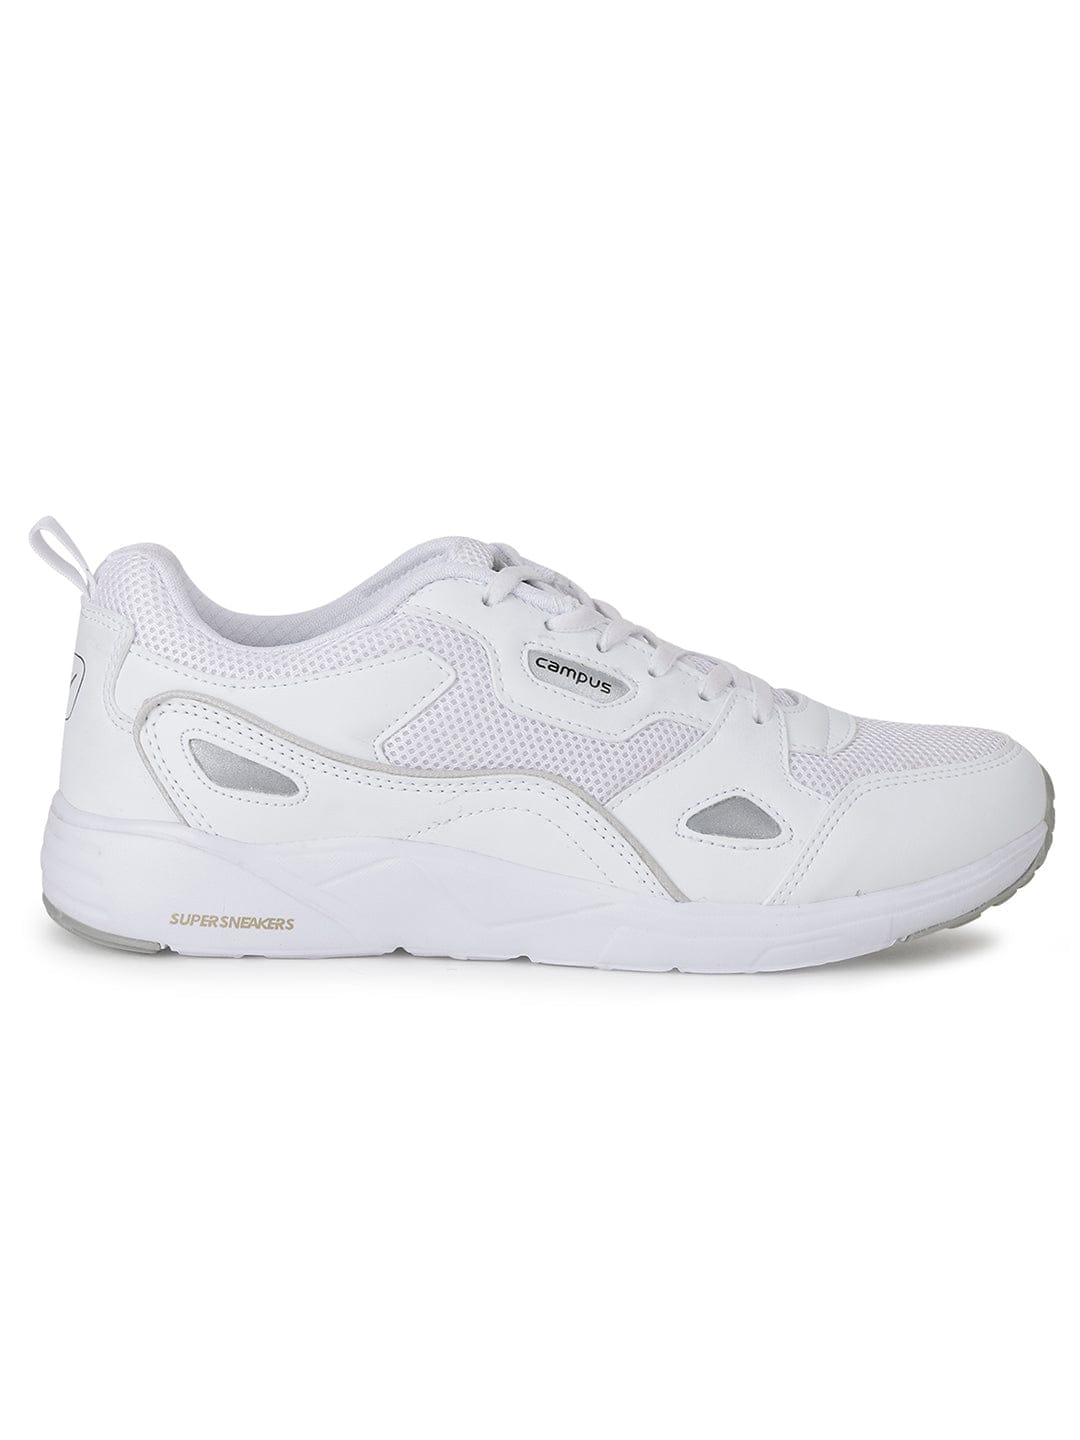 Buy Running Shoes For Men: Wisdom-5G-681Full-Wht1499 | Campus Shoes